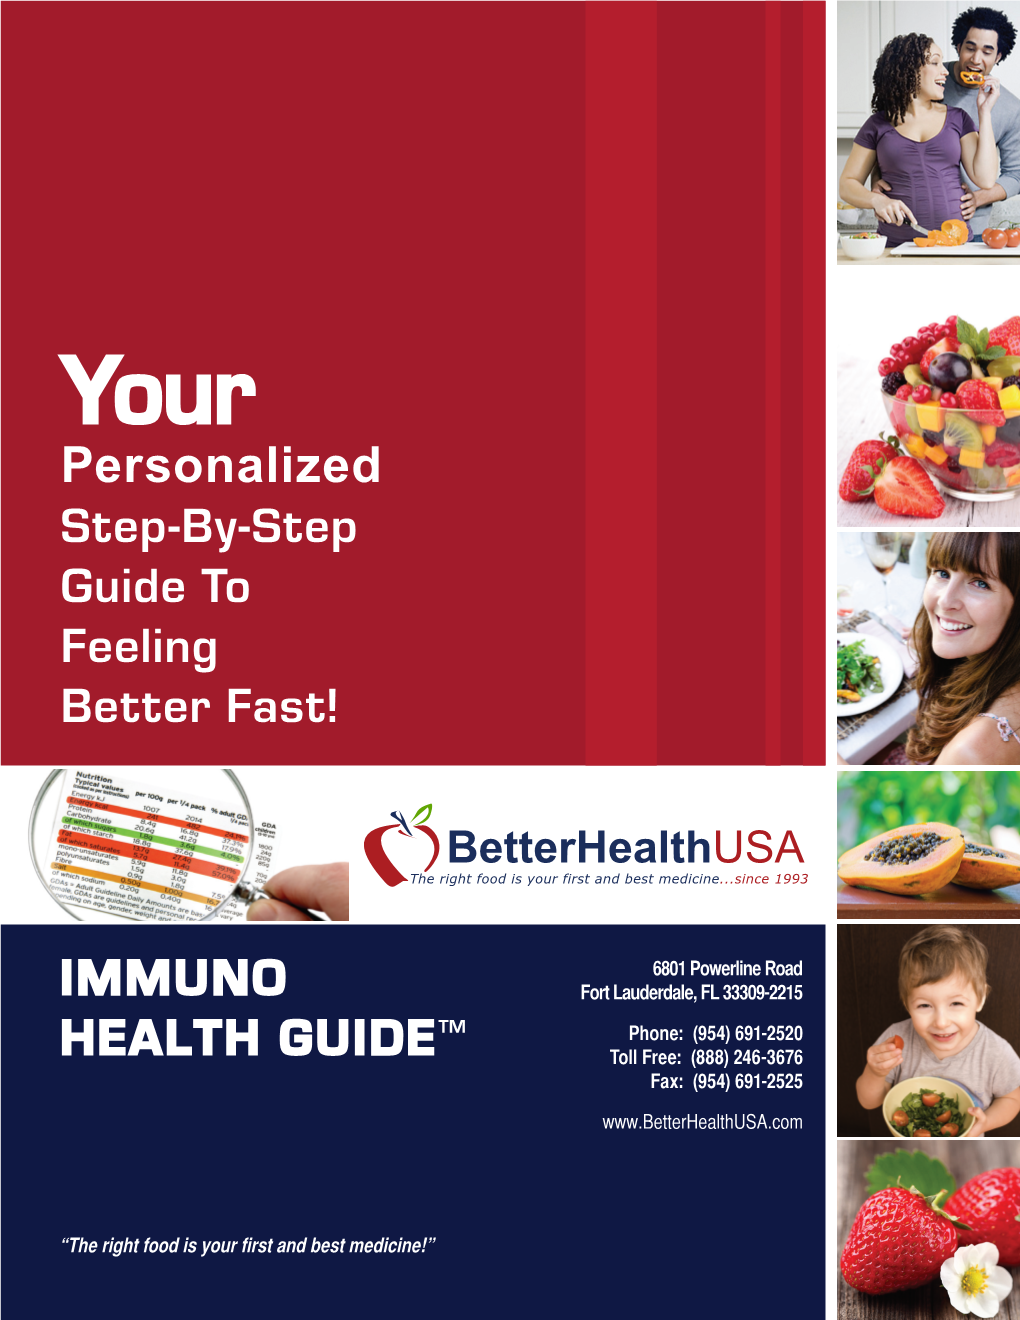 Immuno Health Guide™ for Your Igg Specific Food Allergies and Includes These Unique Benefits